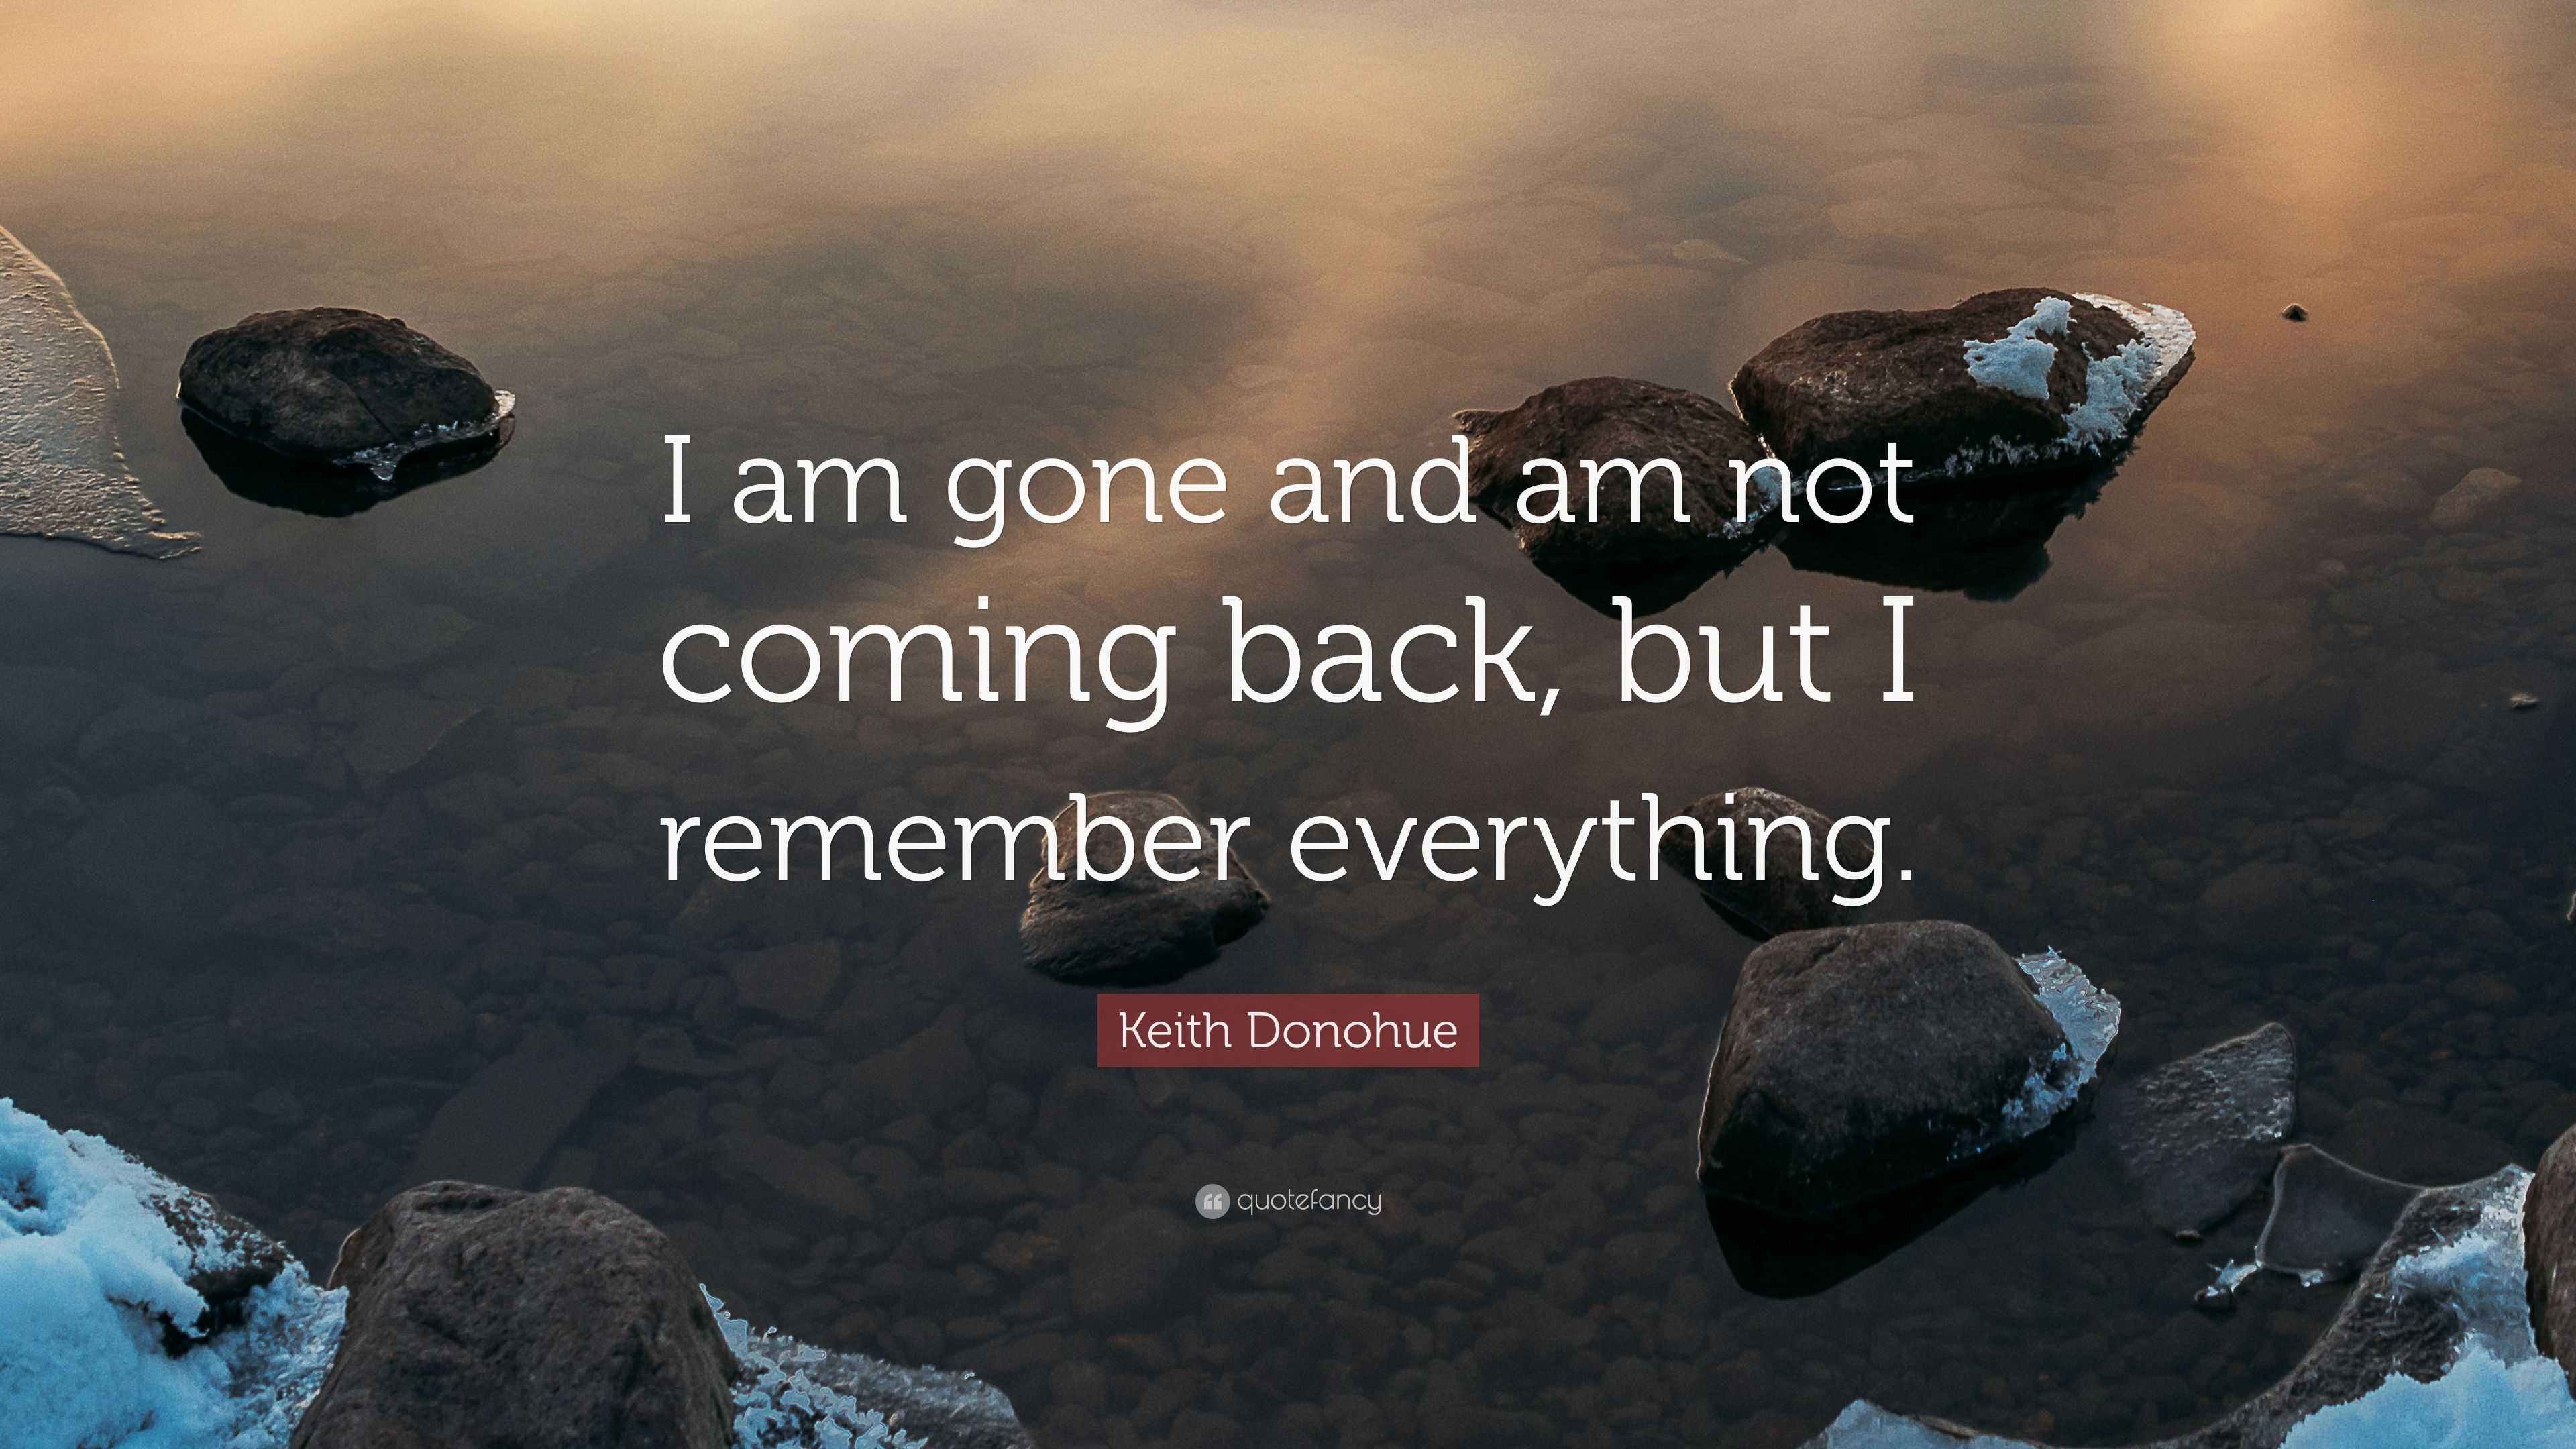 Keith Donohue Quote “I am gone and am not coming back, but I remember